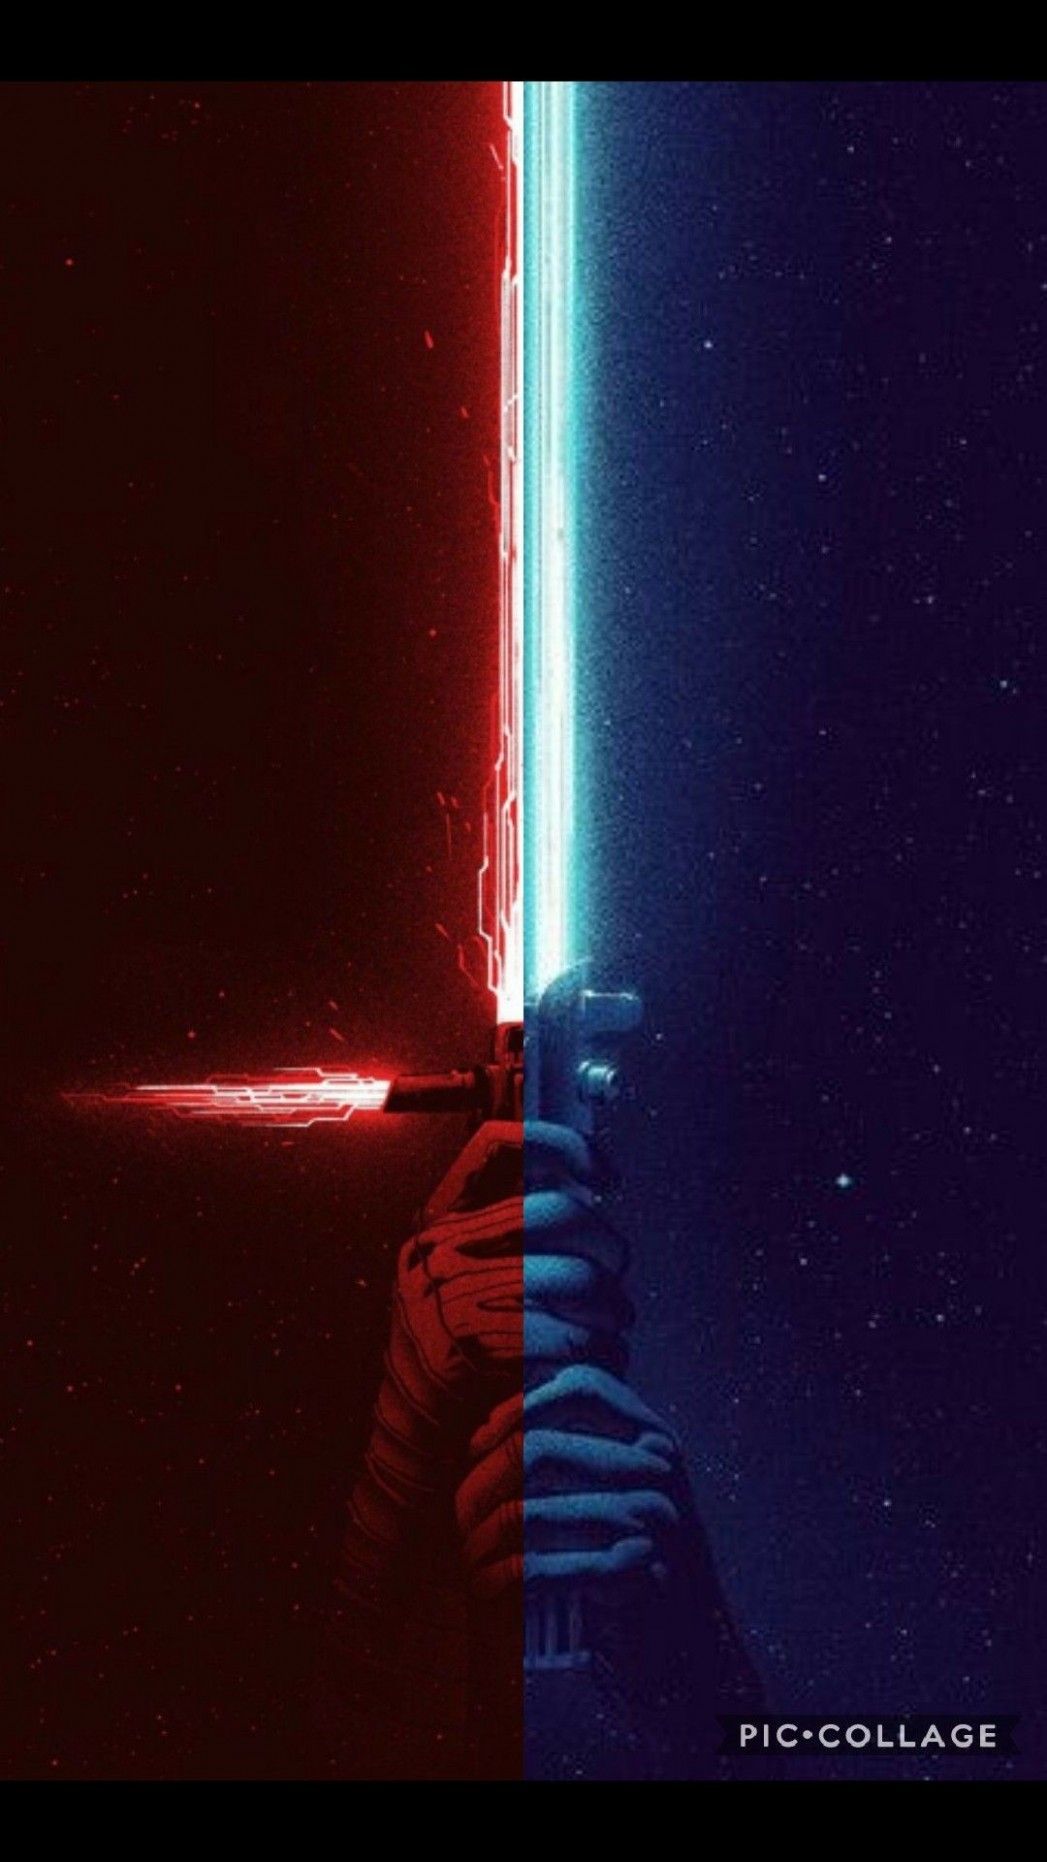 Red Lightsaber Wallpapers